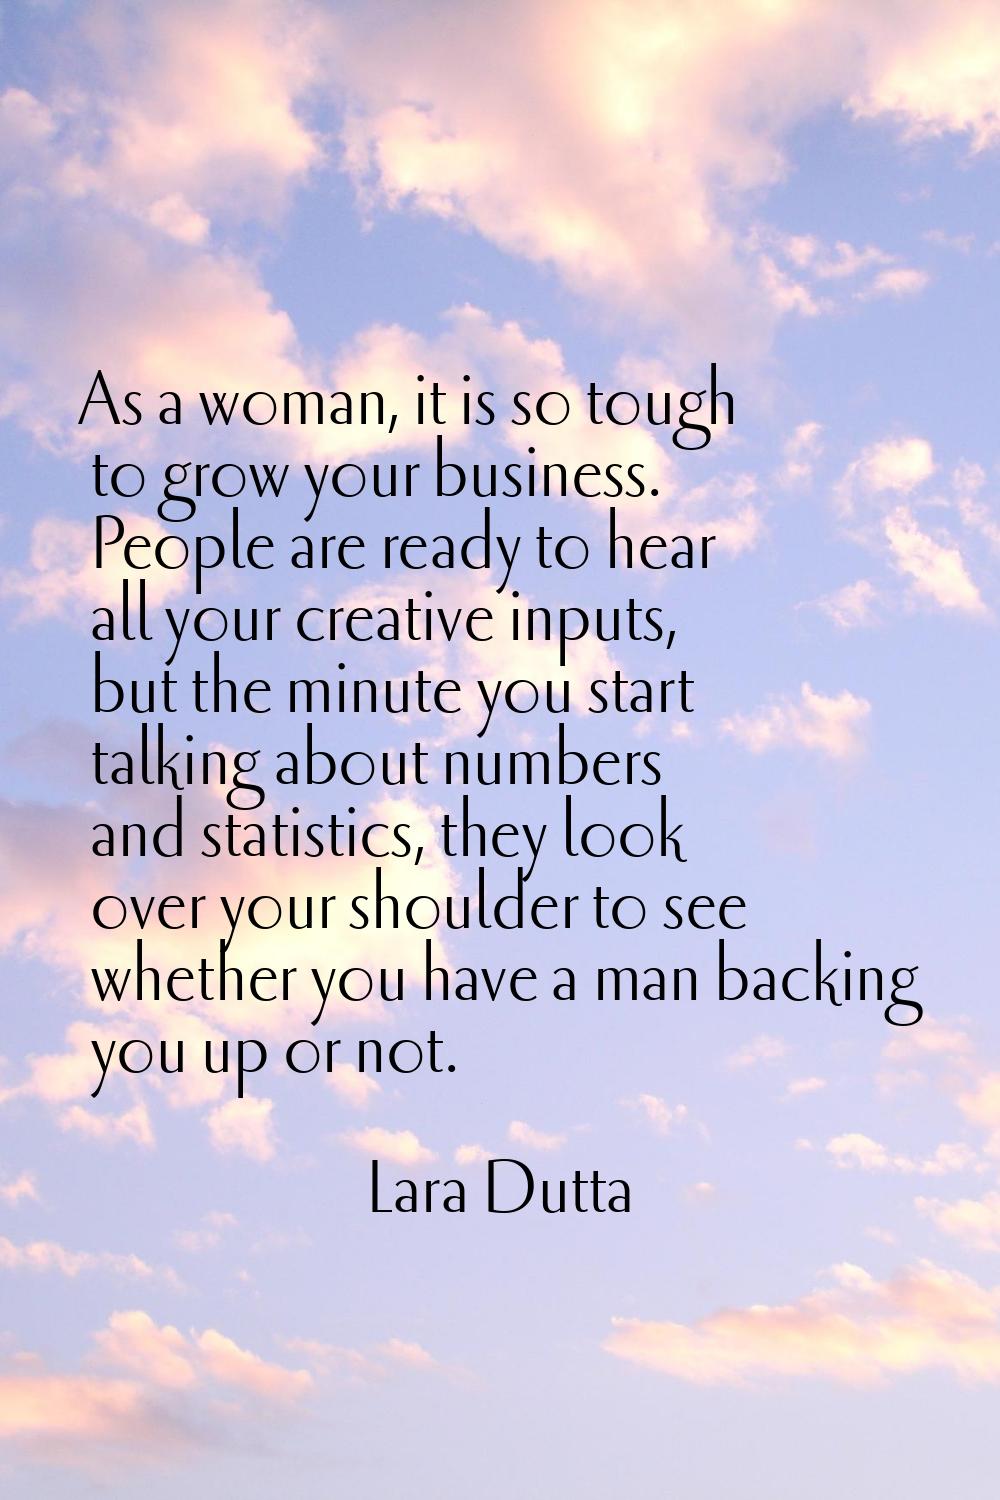 As a woman, it is so tough to grow your business. People are ready to hear all your creative inputs